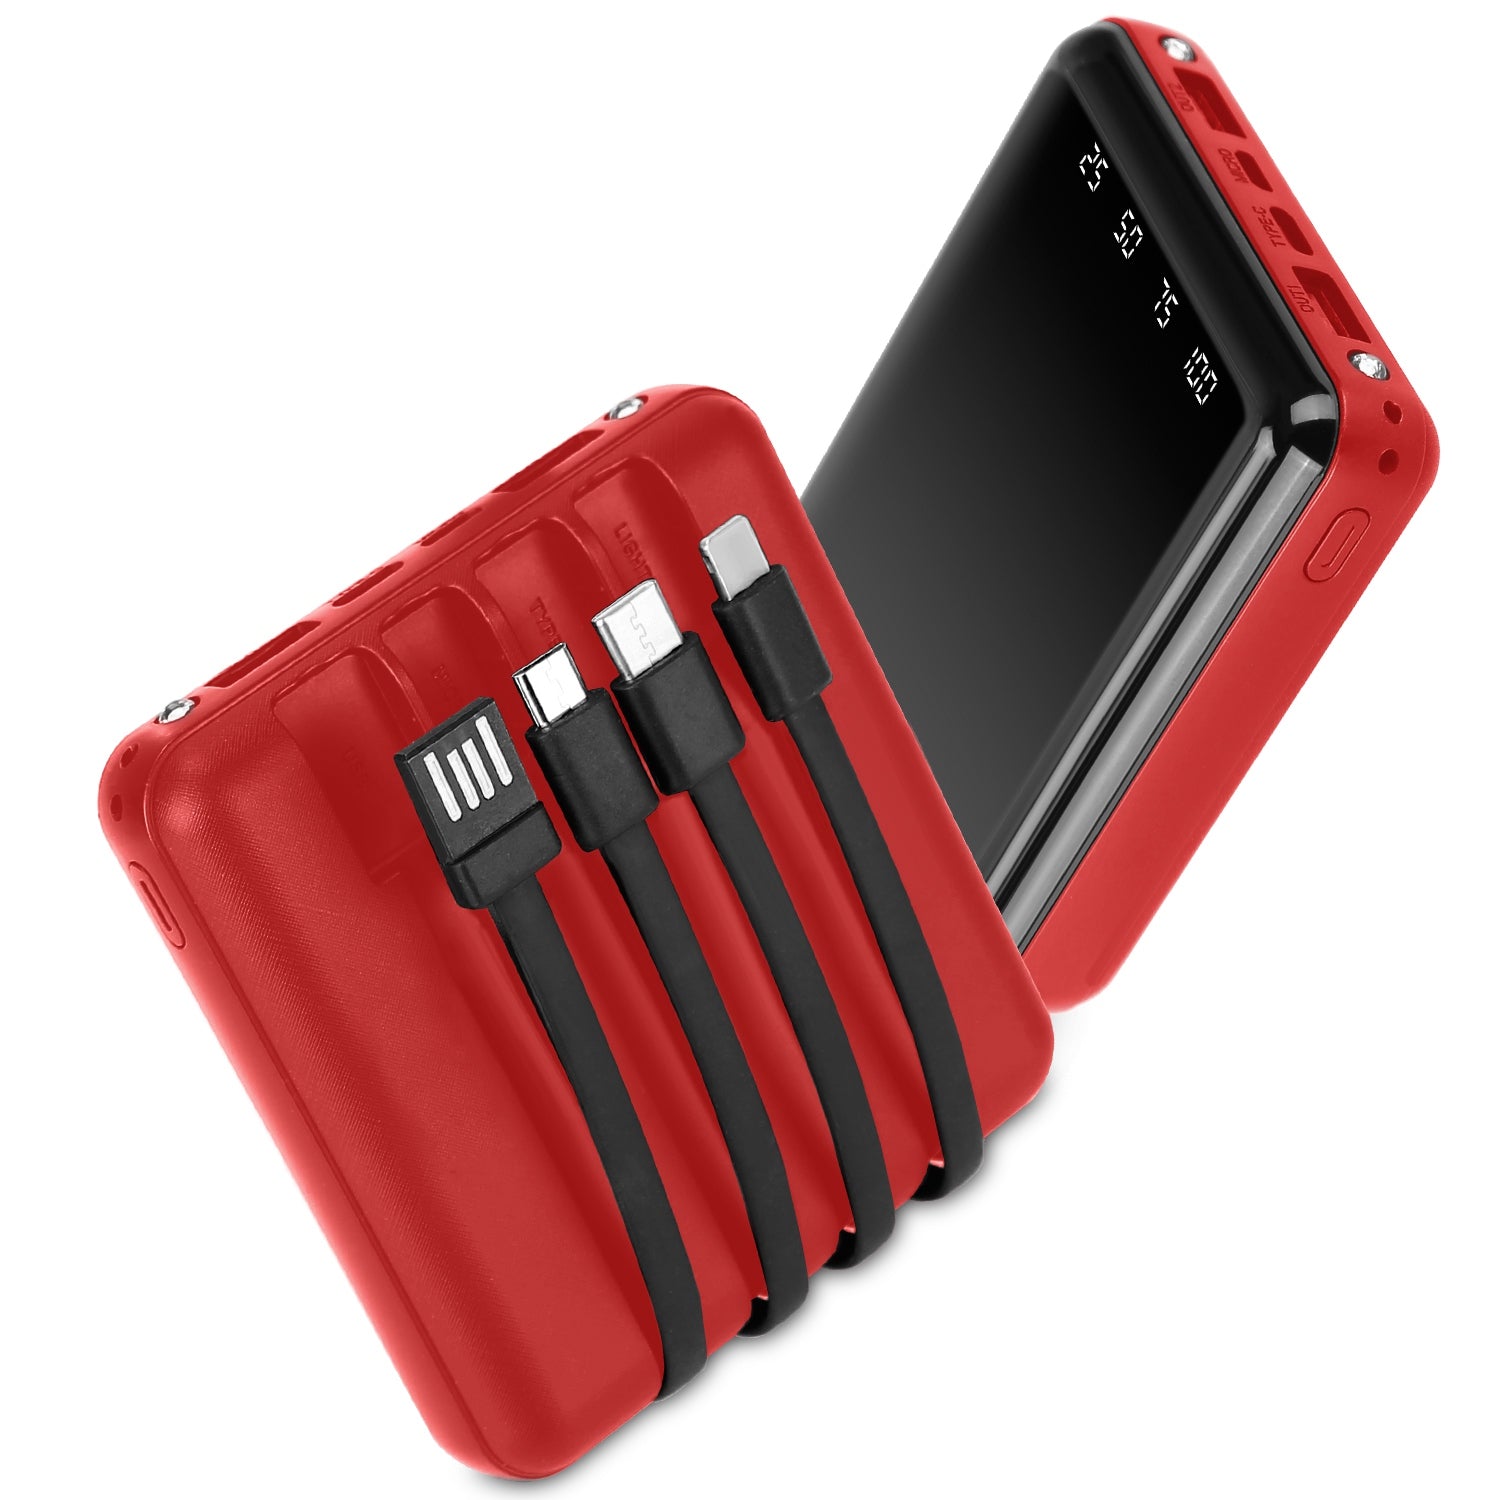 title:10000mAh Portable Charger Power Bank External Battery Pack w/ 4 Built-in Cables w/ LED Flashlight;color:Red